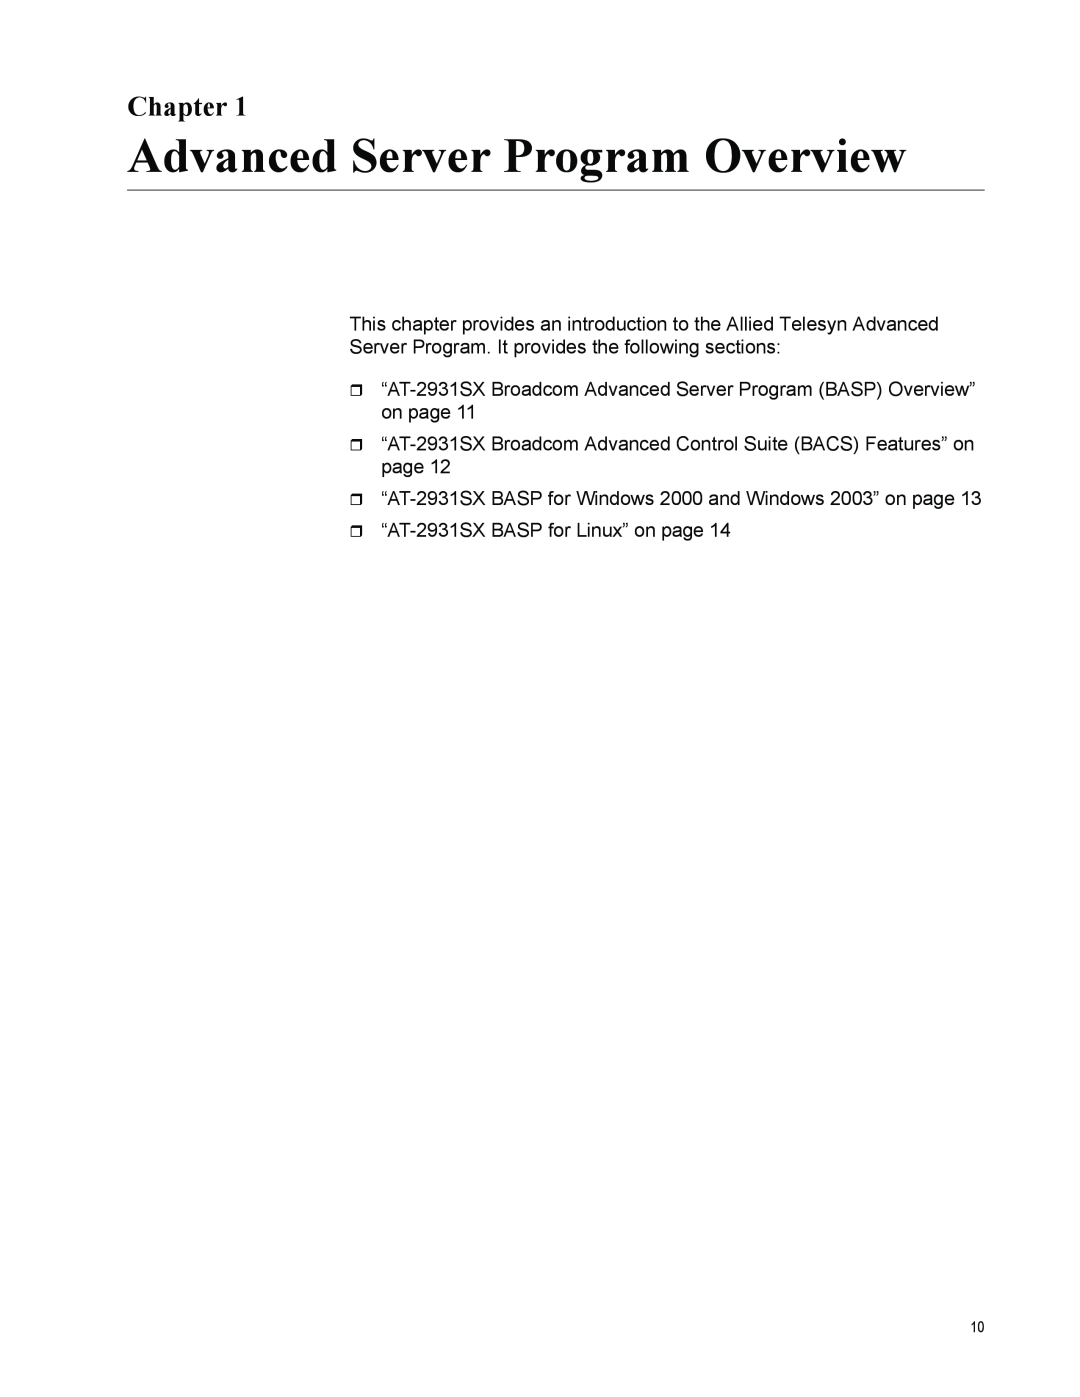 Allied Telesis AT-2931SX manual Advanced Server Program Overview, Chapter 